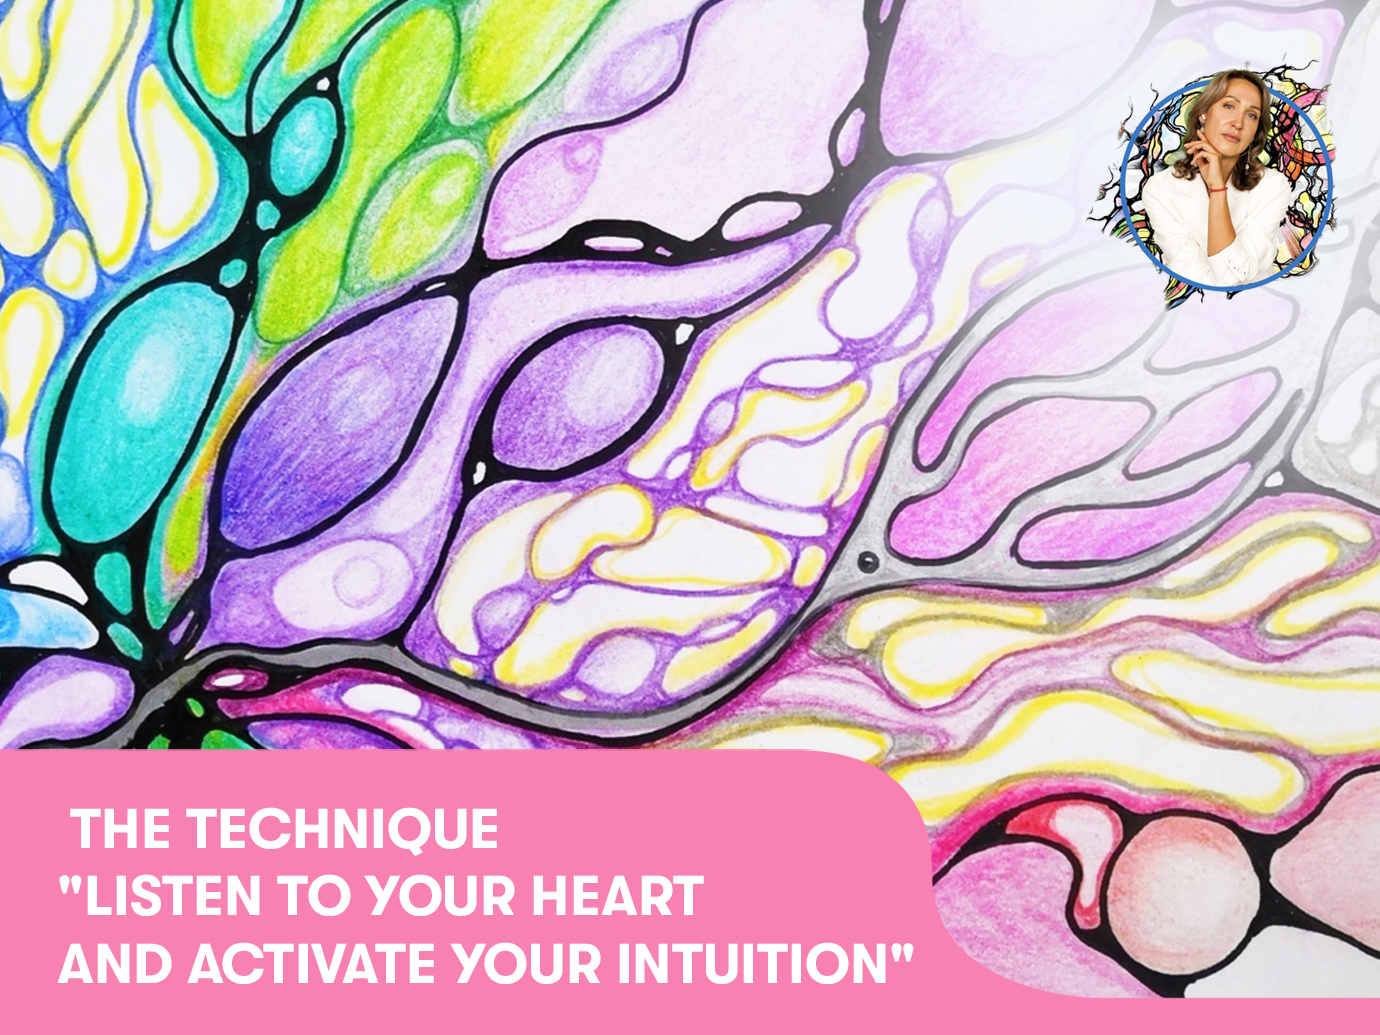 The technique “Listen to your heart and activate your intuition“